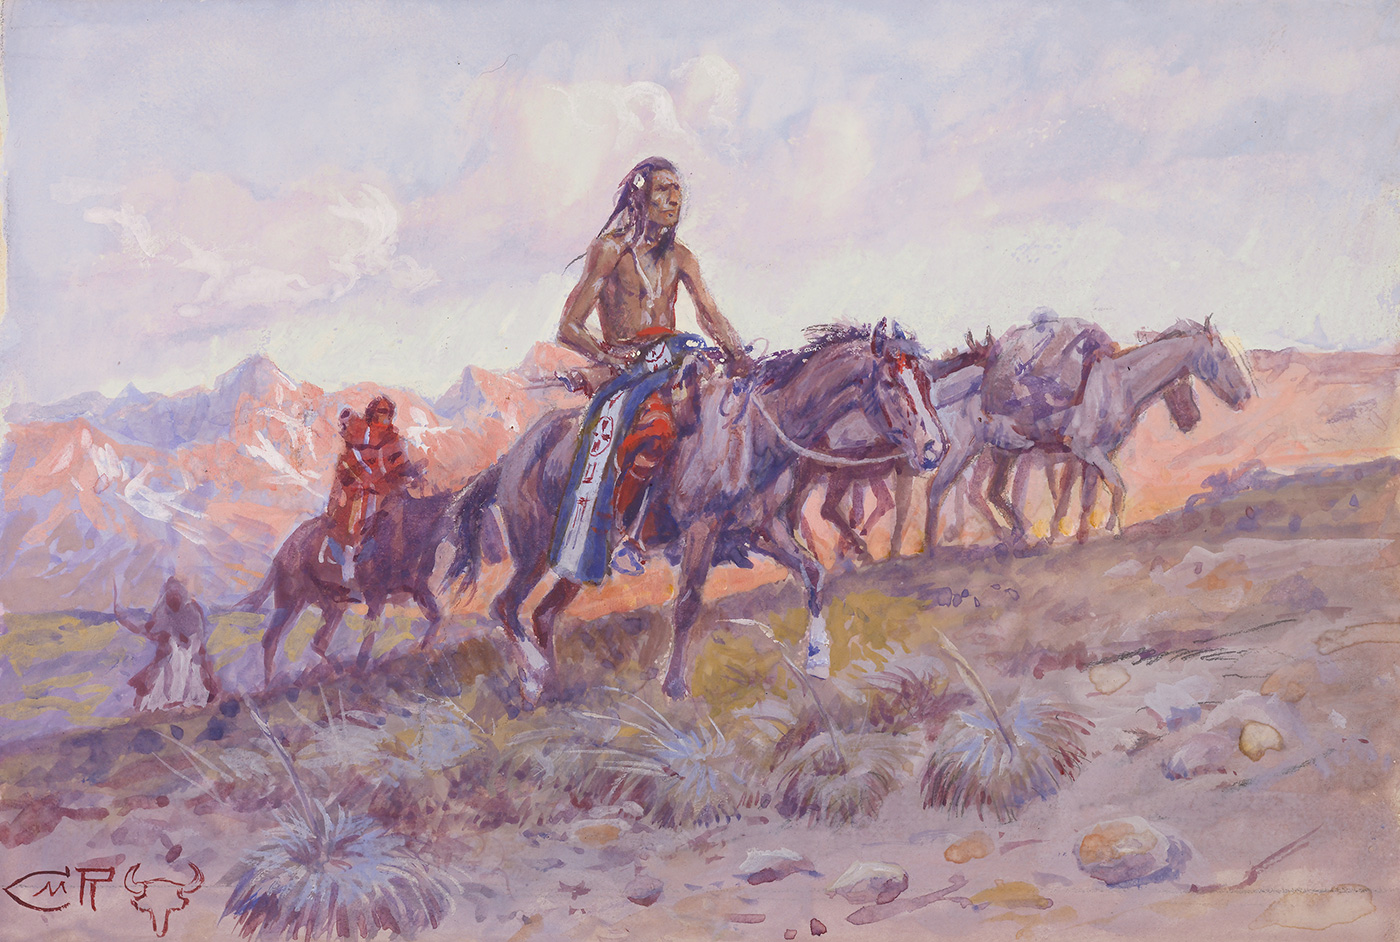 A group of Plains Indians with several pack horses ride across the land.